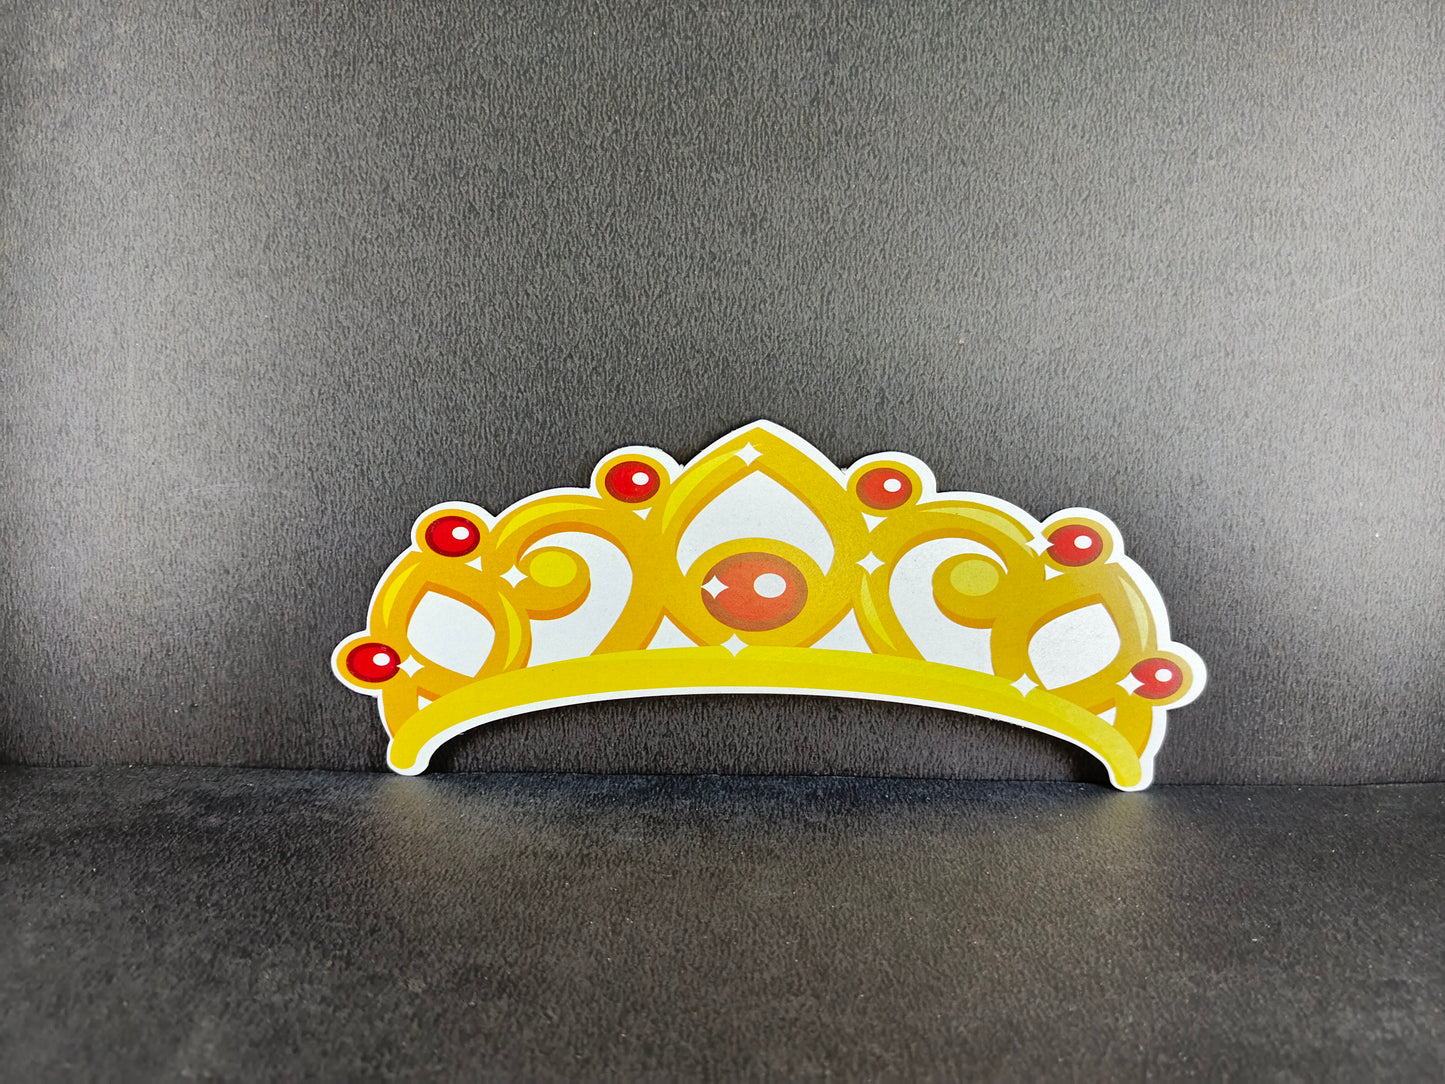 Birthday Decoration Kit - Princess Theme for Simple Birthday Decorations at Home